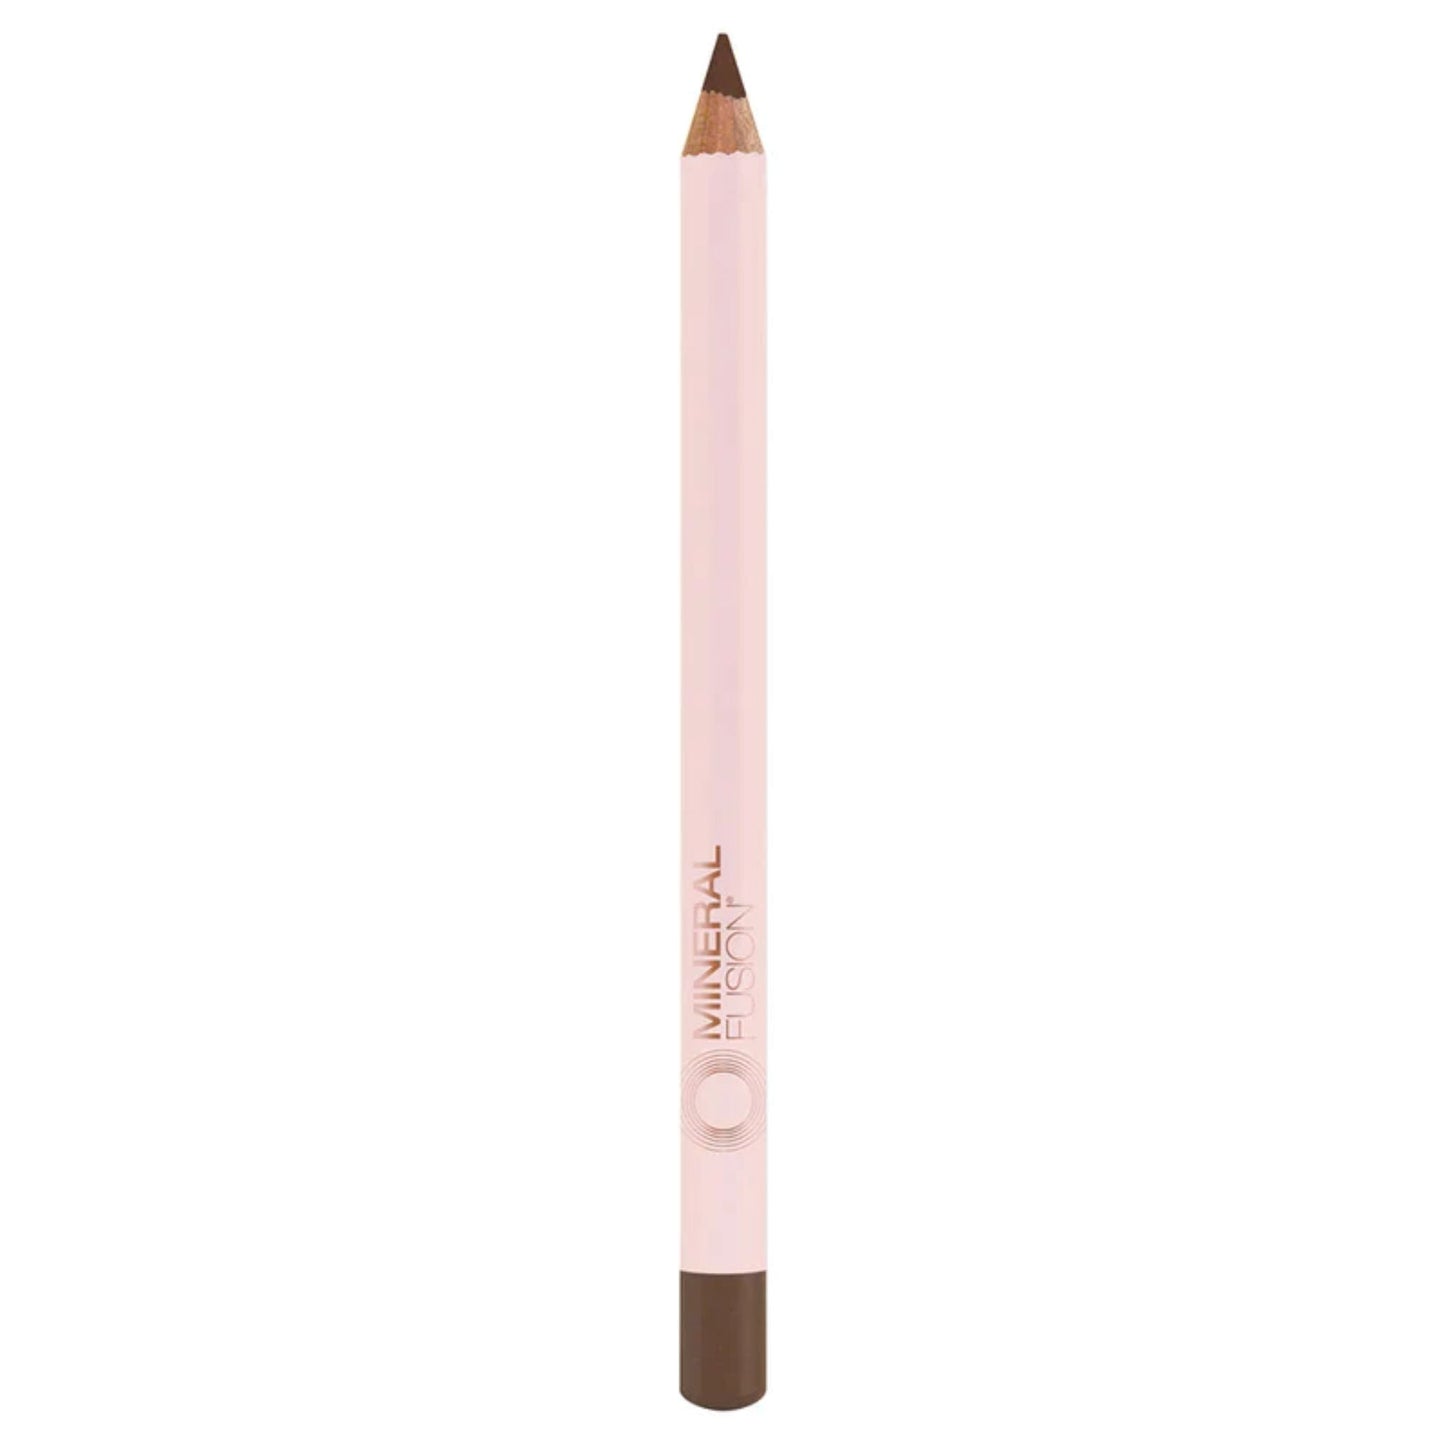 Mineral Fusion Eye Pencil, 1.1g, Clearance 35% Off, Final Sale